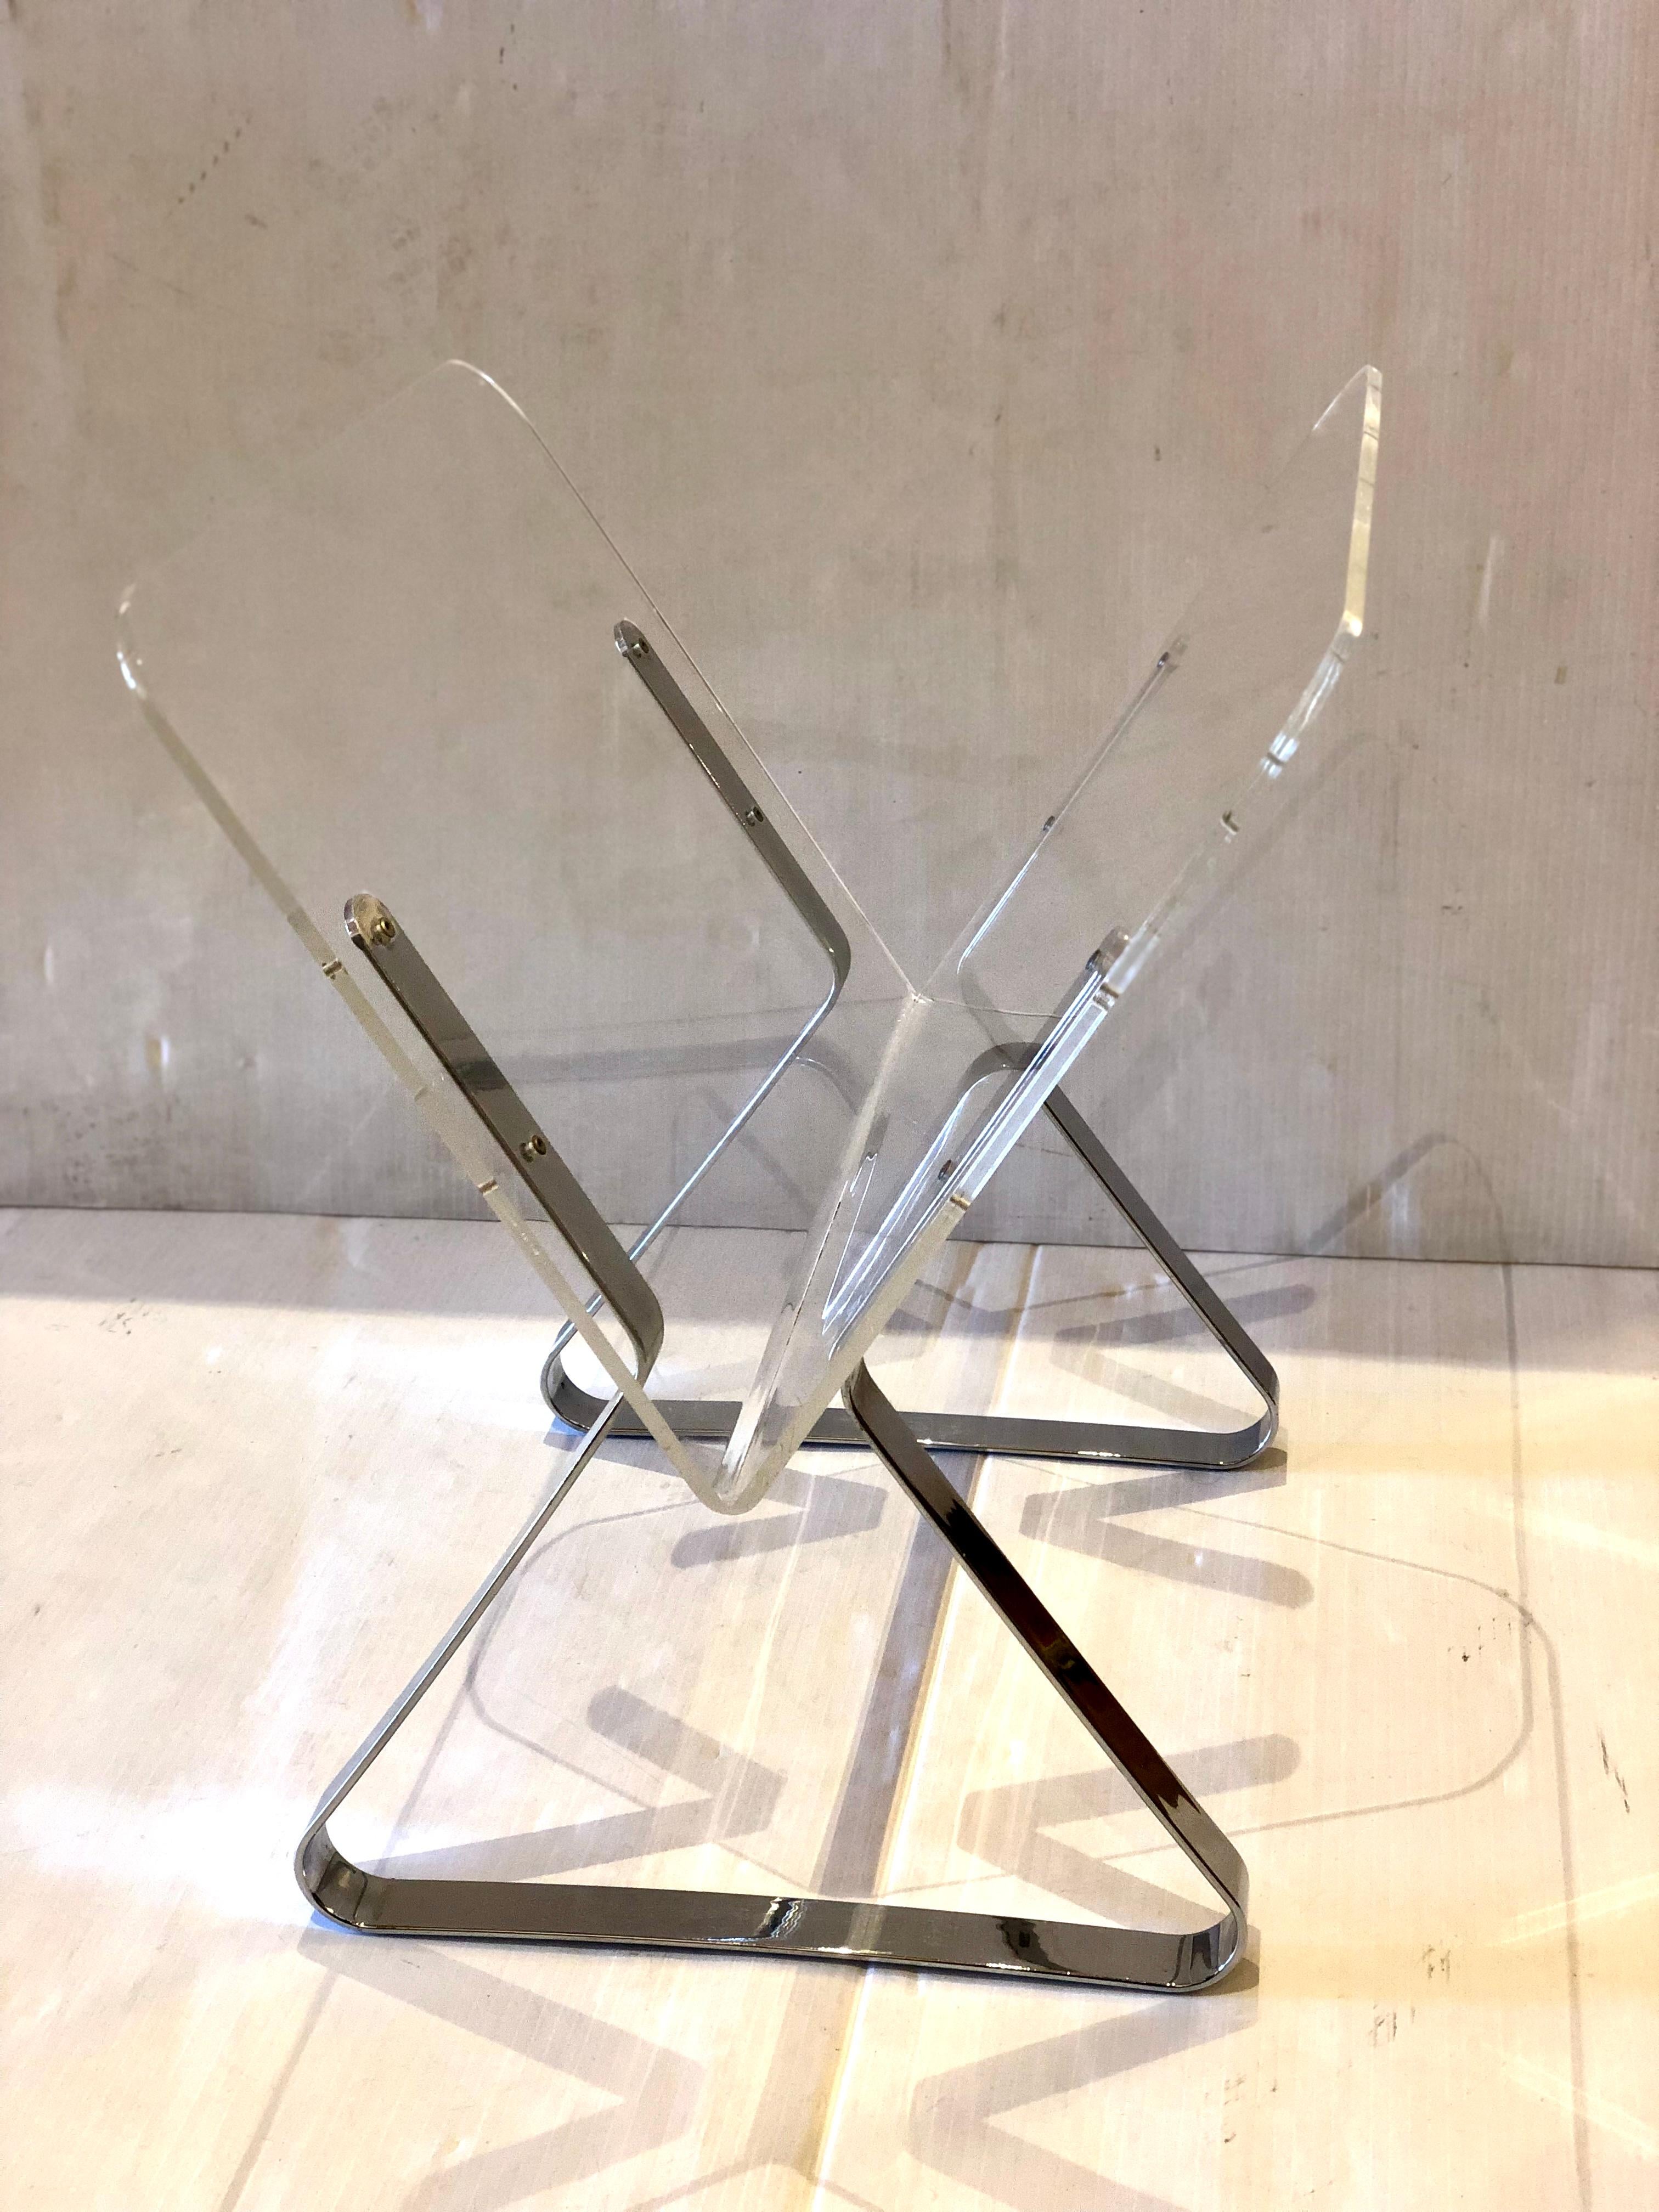 Beautiful magazine holder circa 1970s solid chrome base with Lucite holder, we polished the base and the Lucite very nice and clean condition.